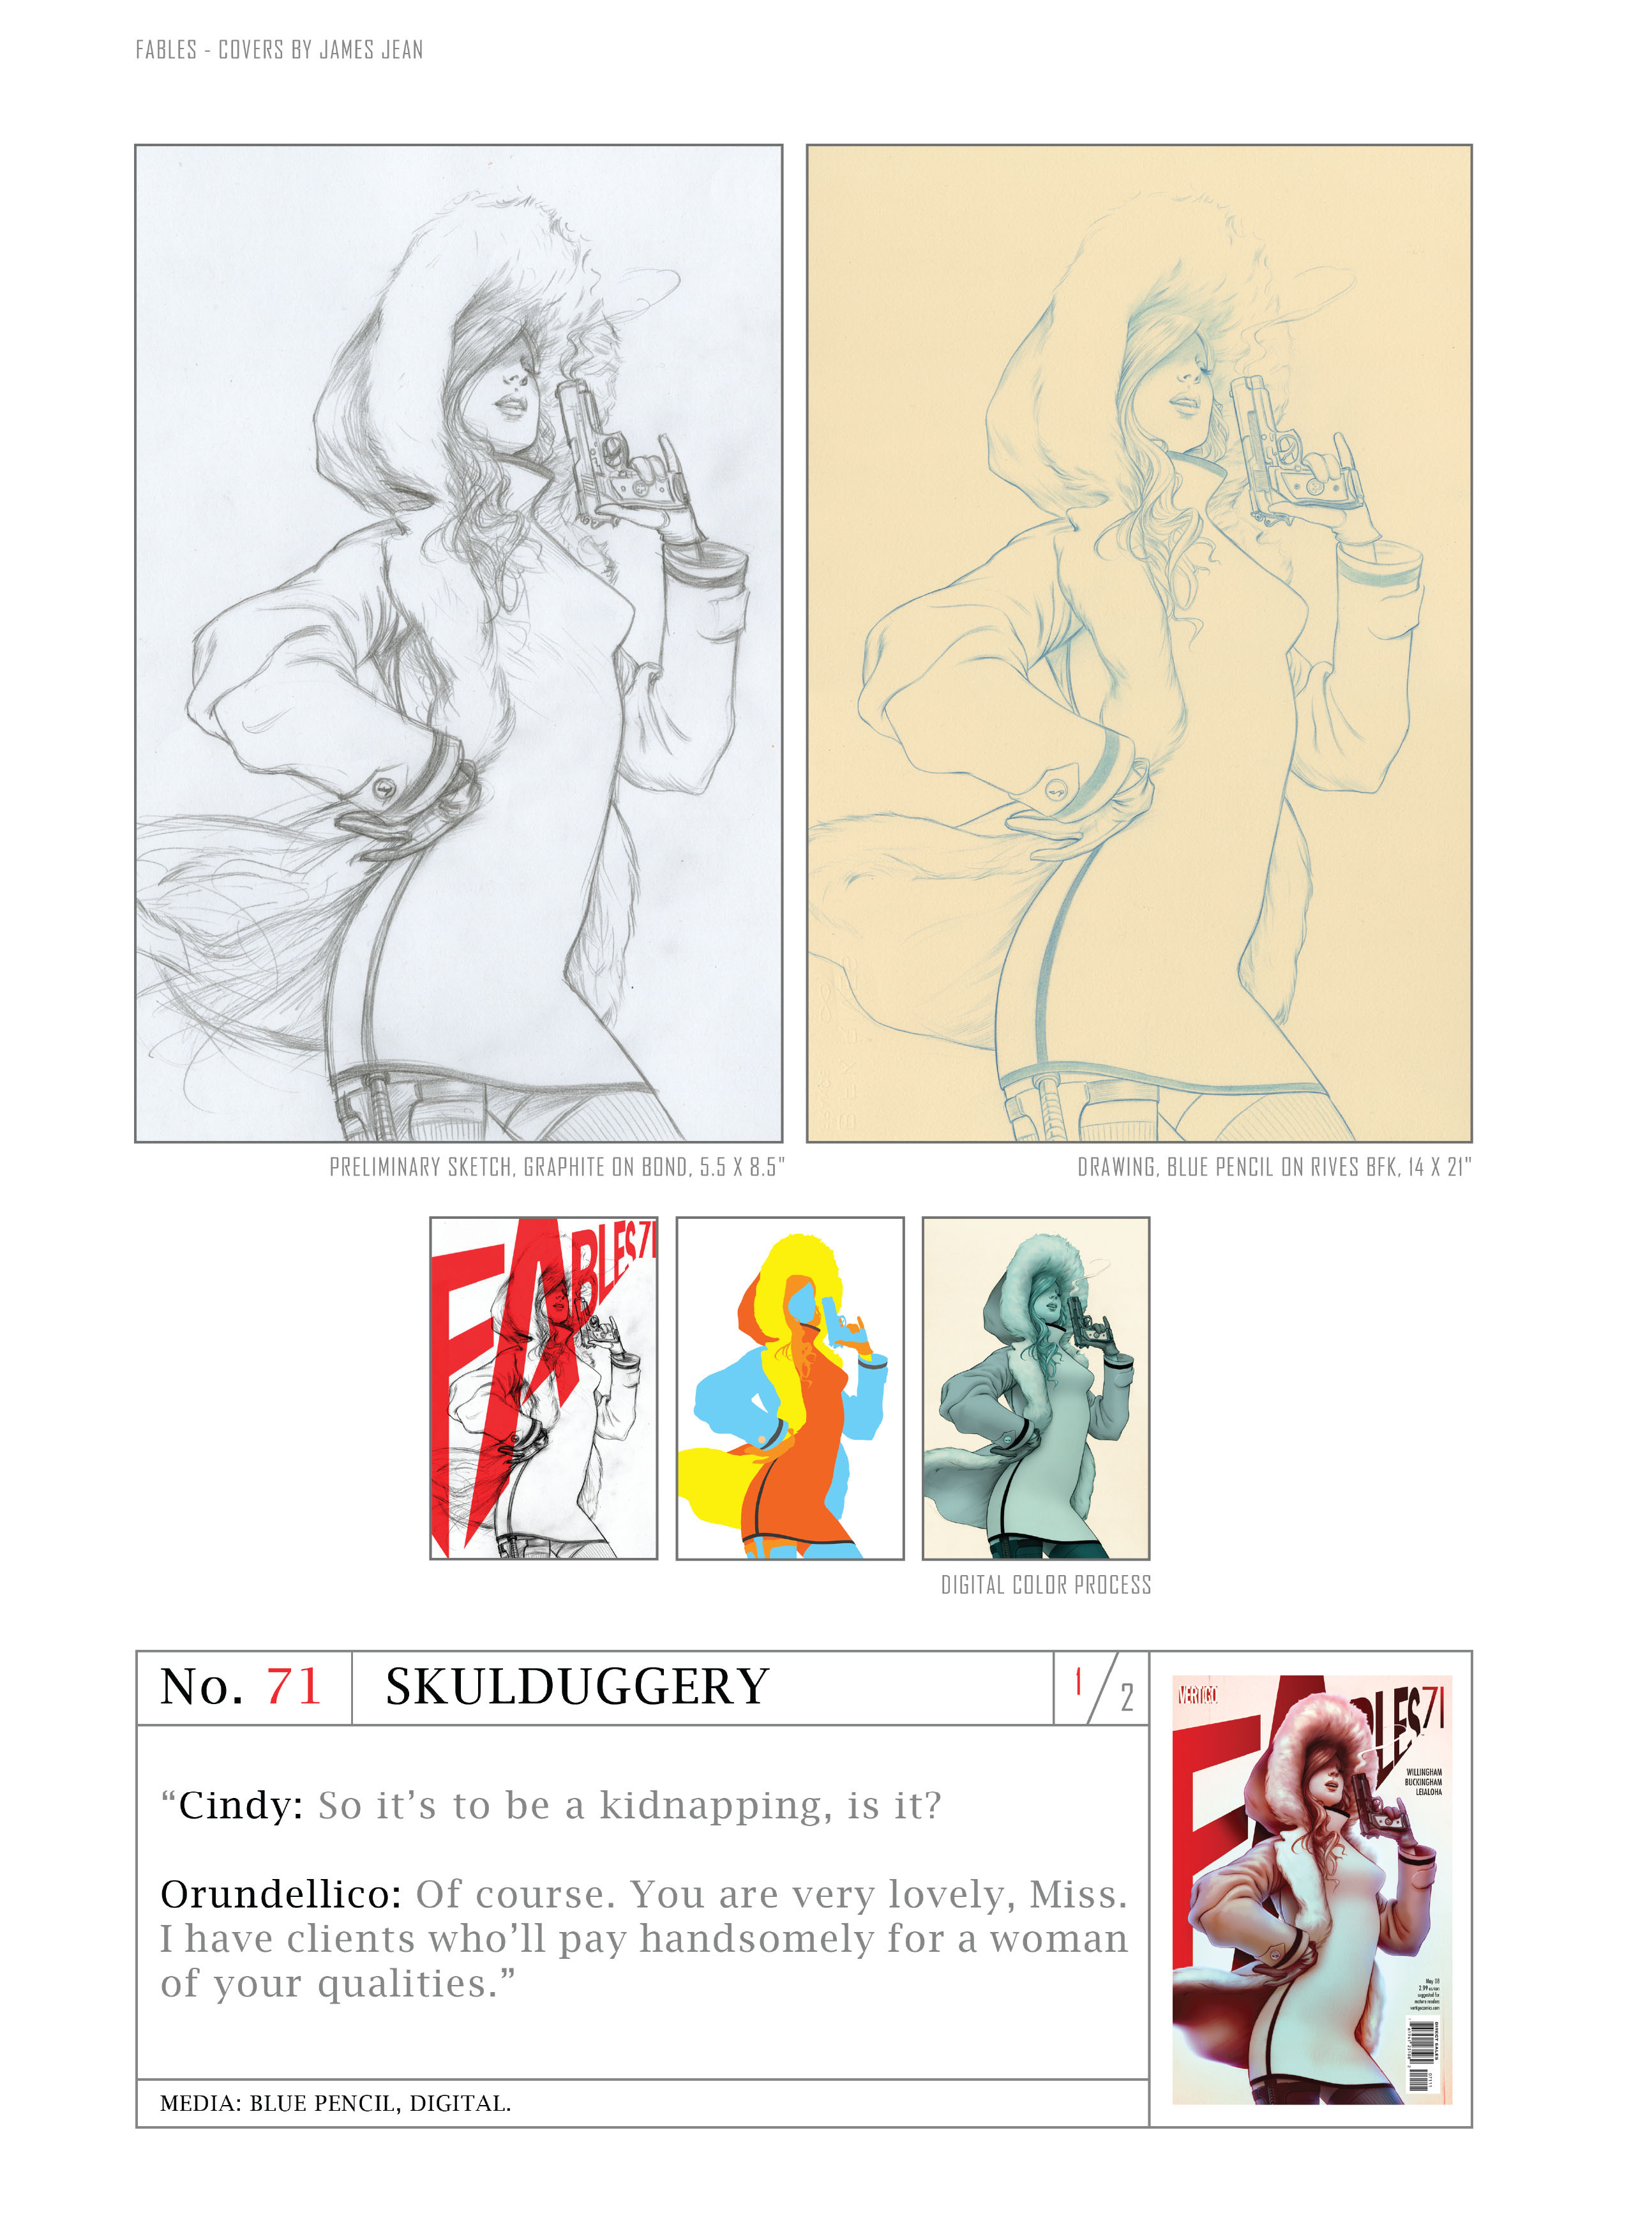 Read online Fables: Covers by James Jean comic -  Issue # TPB (Part 2) - 78